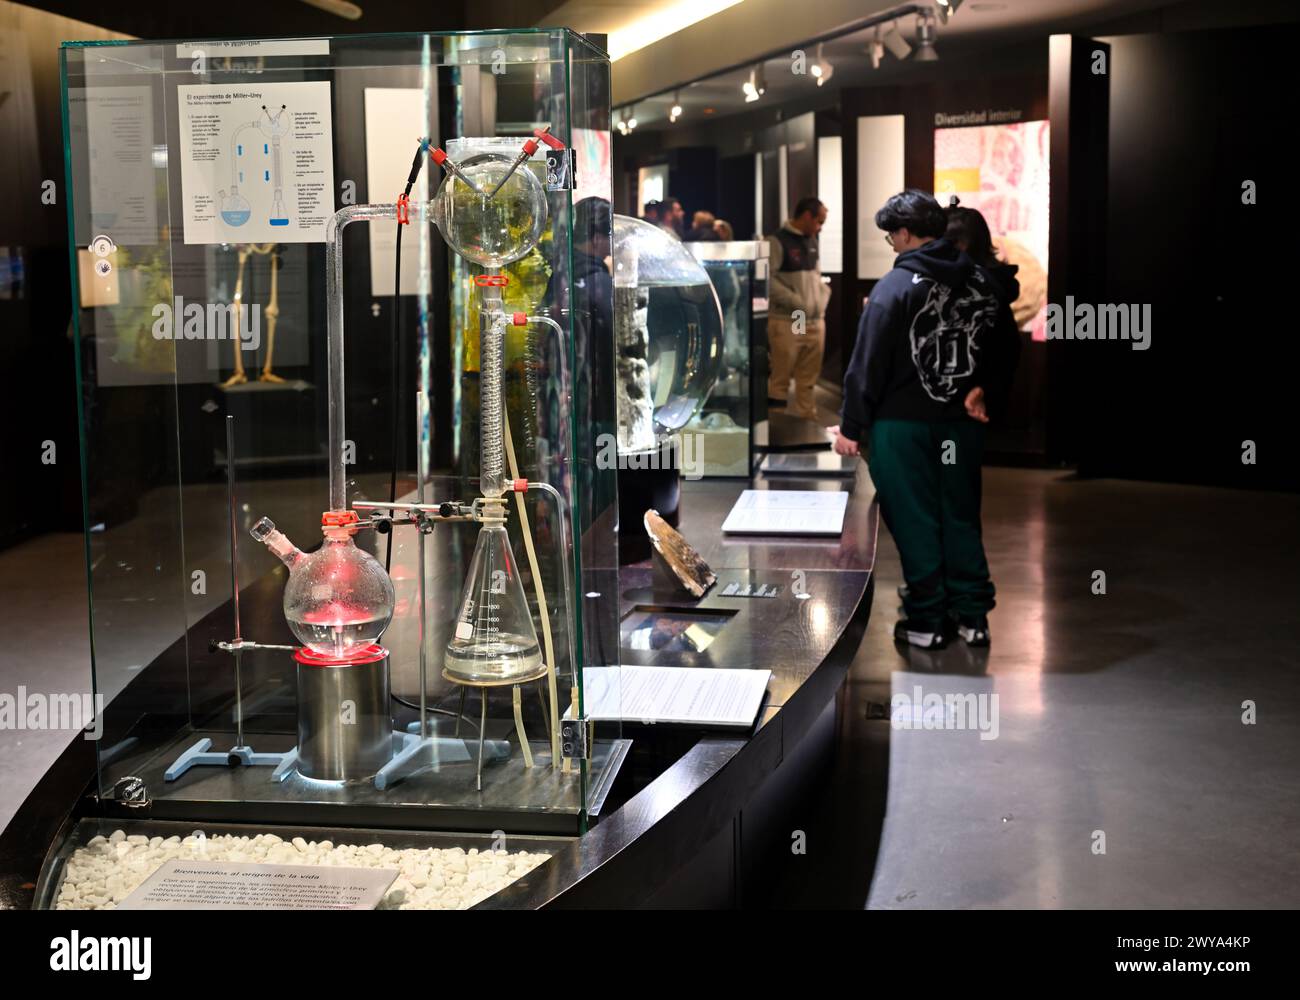 Exhibit in the chemistry section of the Granada Science Museum and origin of life, Granada, Spain Stock Photo